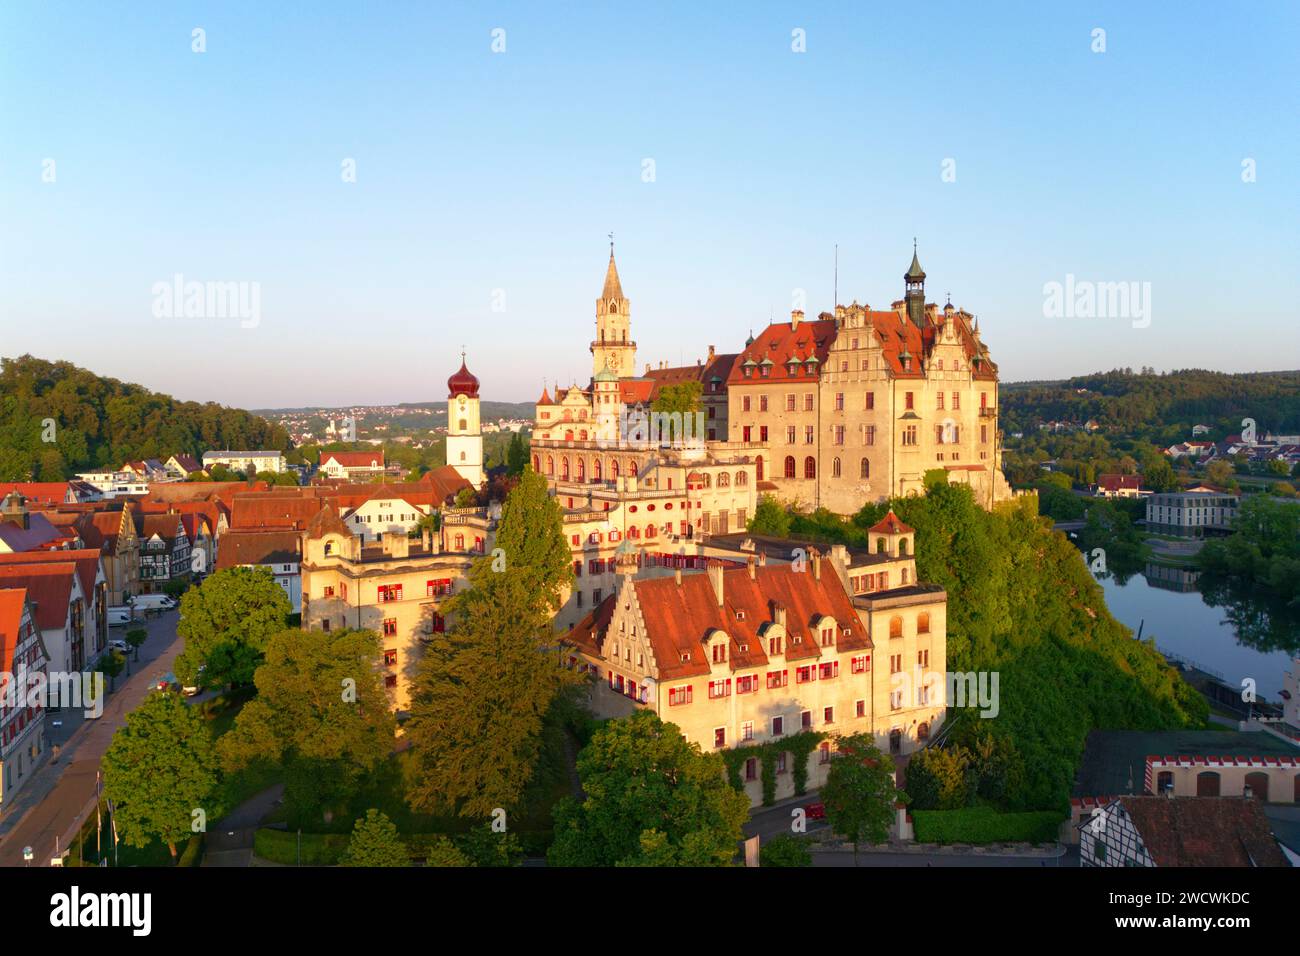 Germany, Baden Wurttemberg, Upper Swabia (Schwäbische Alb), Sigmaringen, Sigmaringen Castle, a Hohenzollern castle, royal residential palace and administrative seat of the Princes of Hohenzollern-Sigmaringen Stock Photo